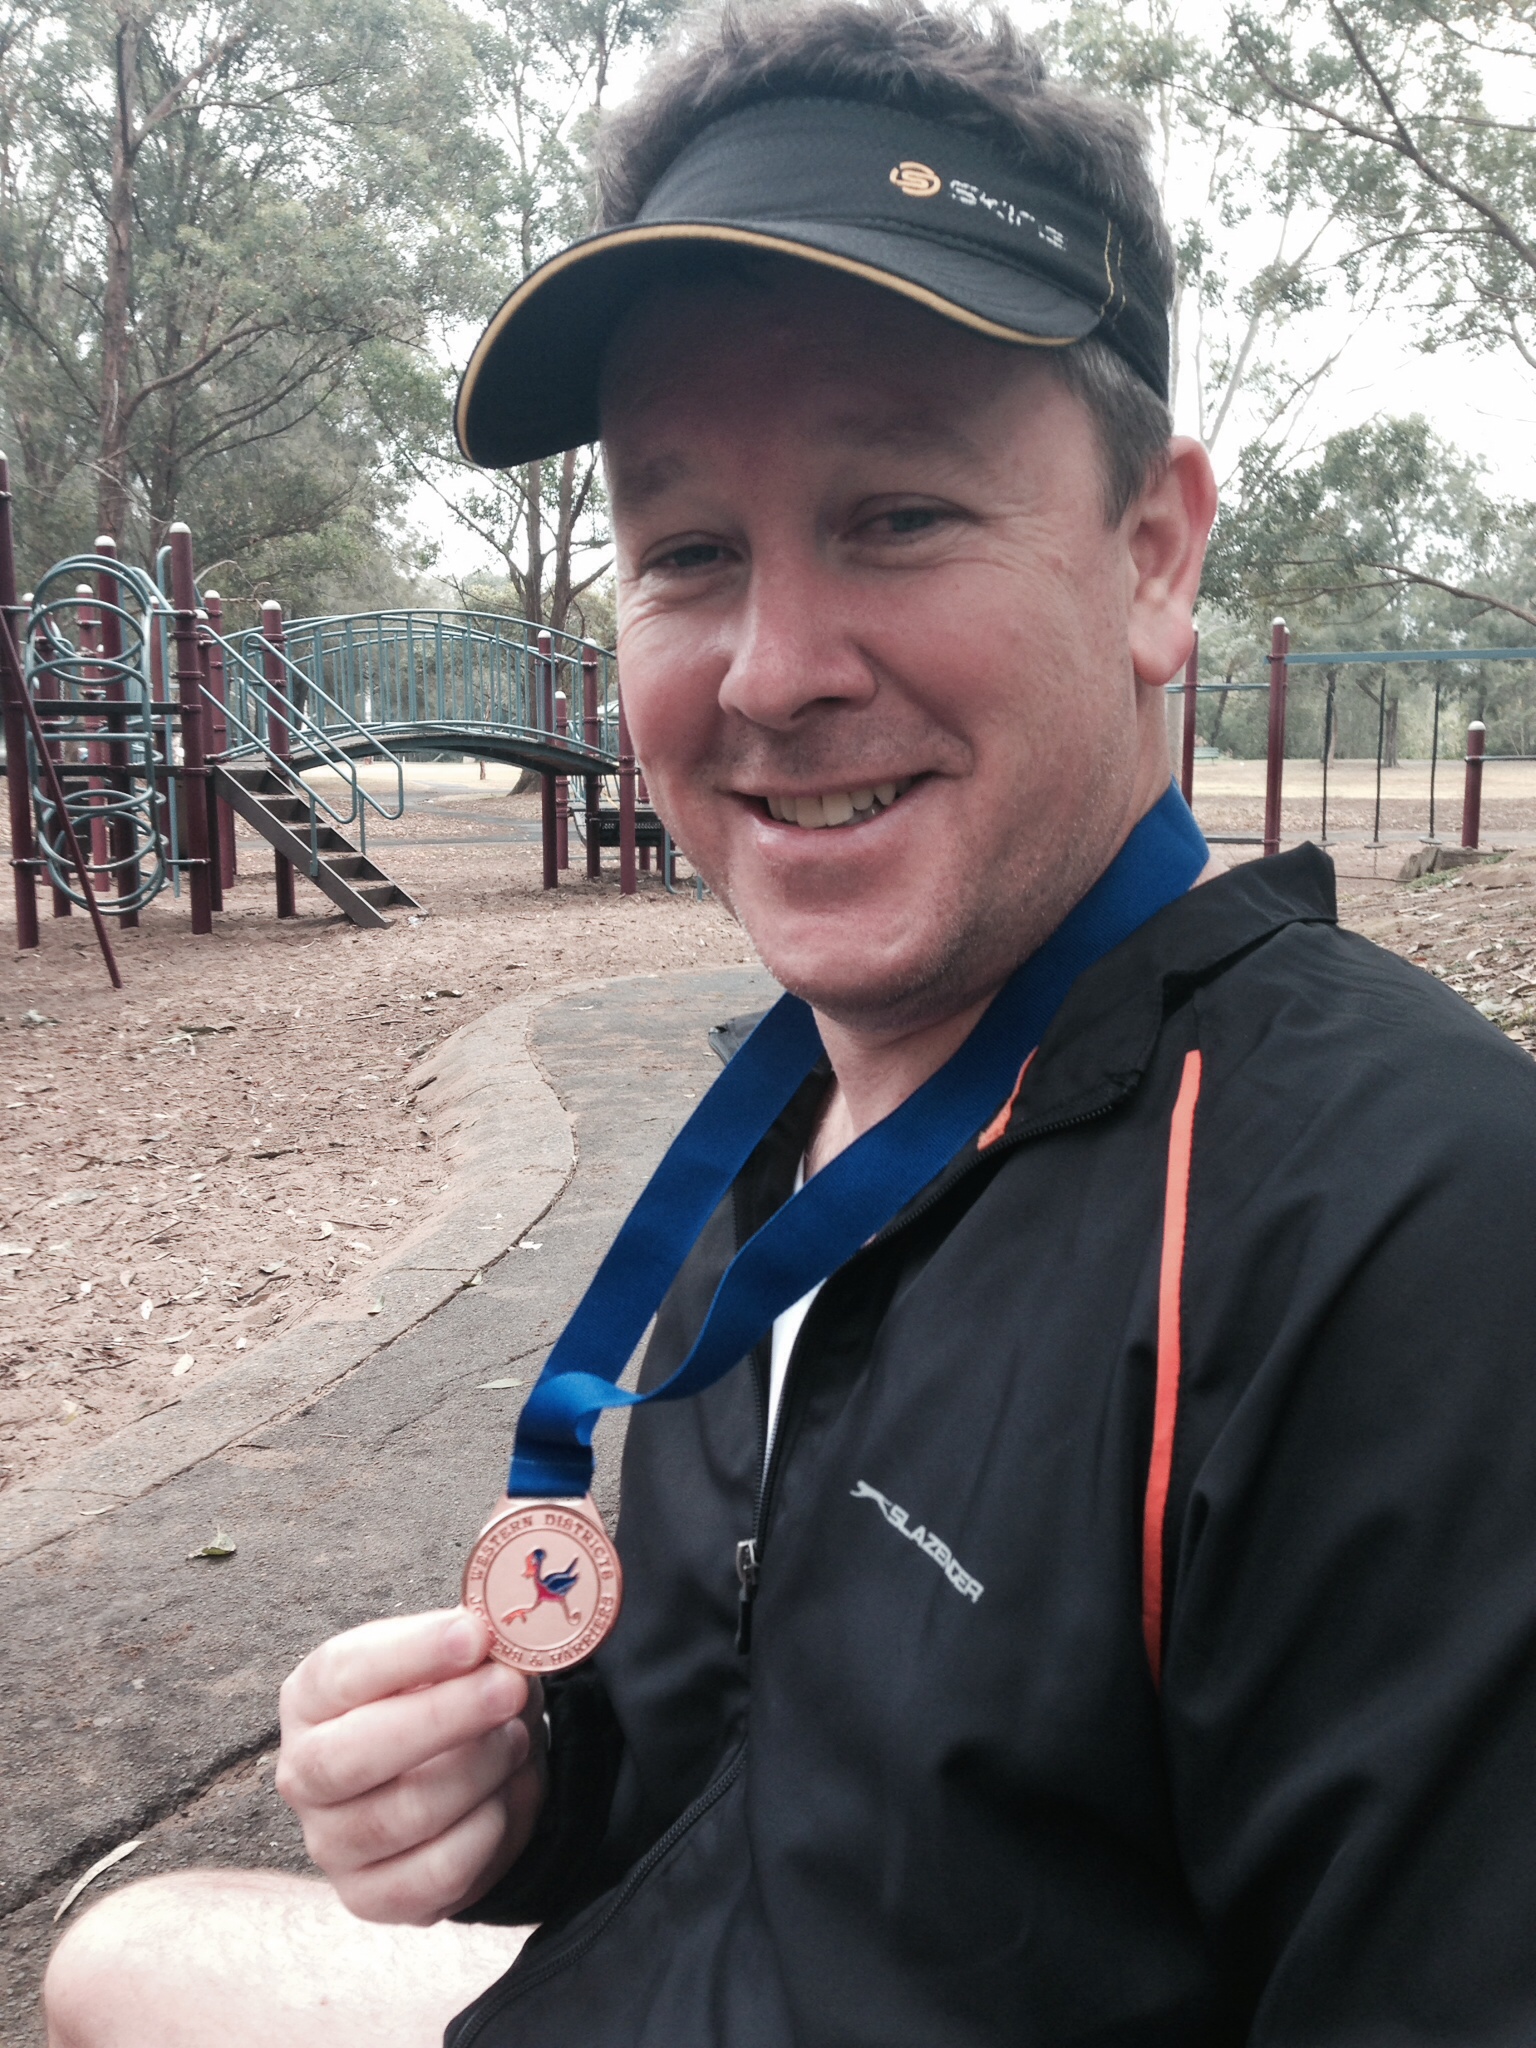 Mike and his bronze medal